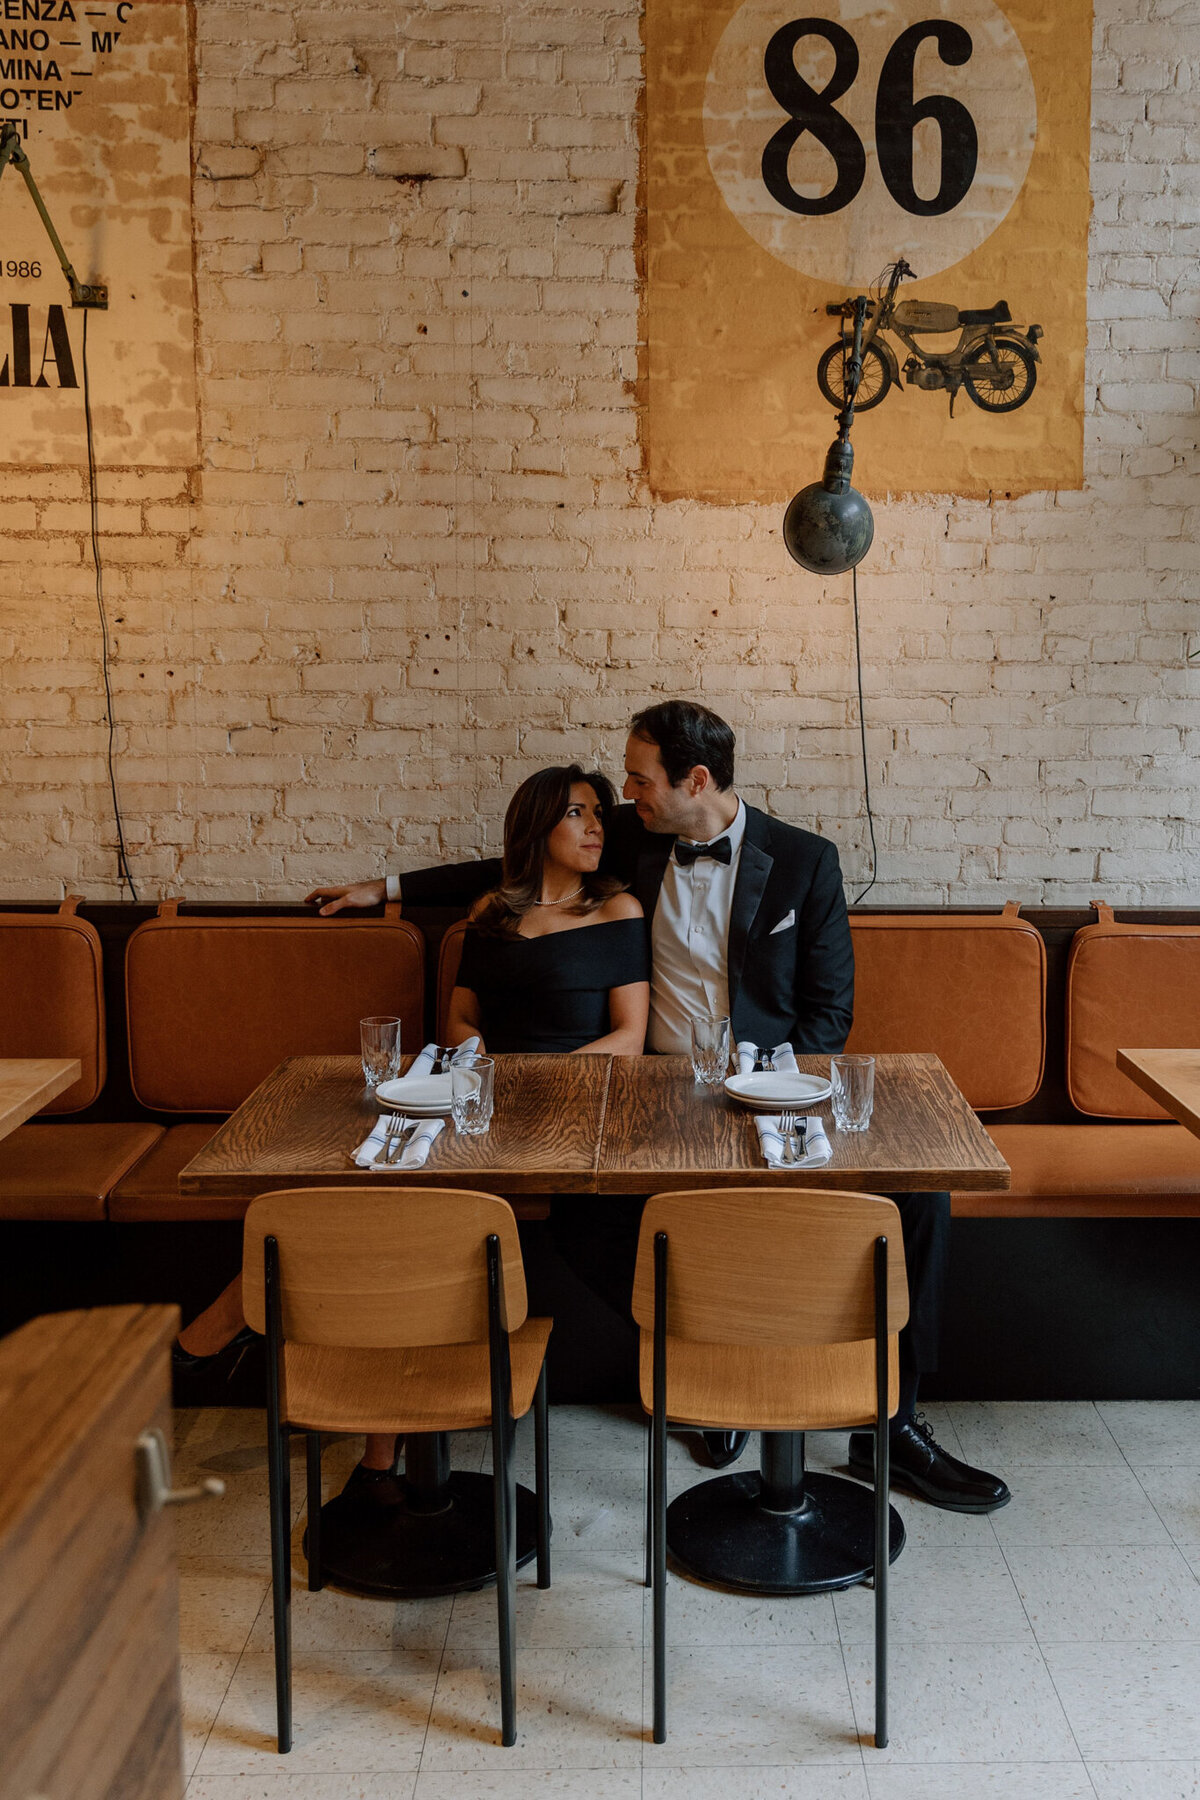 Trendy and modern indoor cafe engagement inspiration by Bronte Taylor Photography, is a Vancouver based photographer with a playful, genuine and intimate approach.